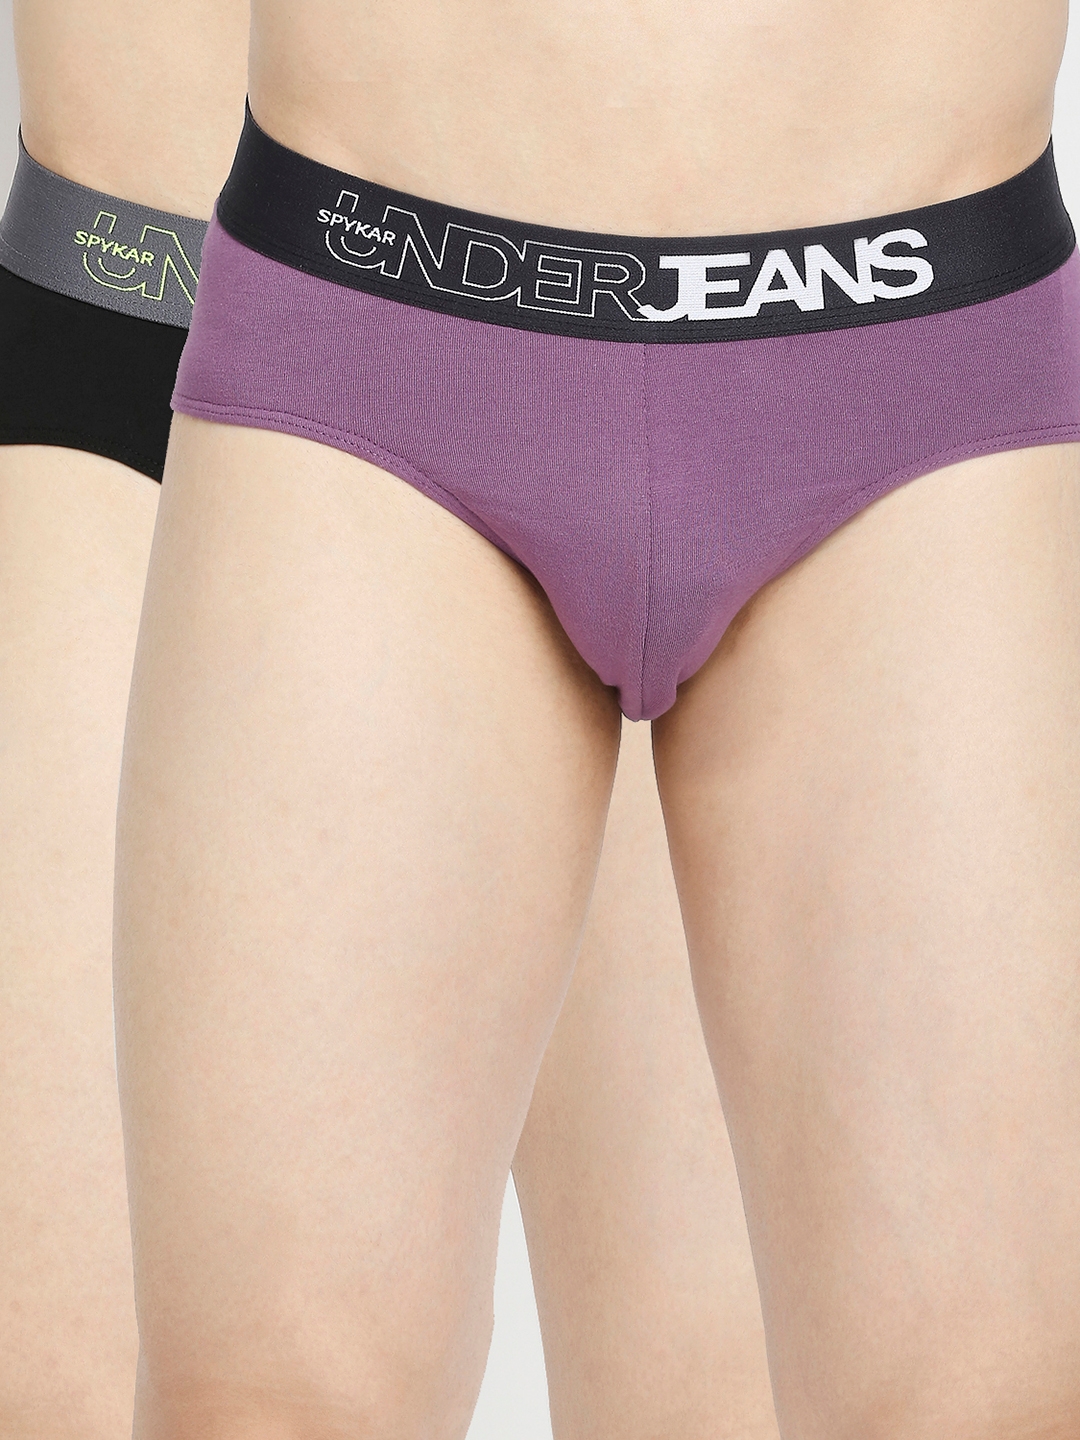 Underjeans by Spykar Dull Purple & Black Cotton Blend Brief - Pack Of 2